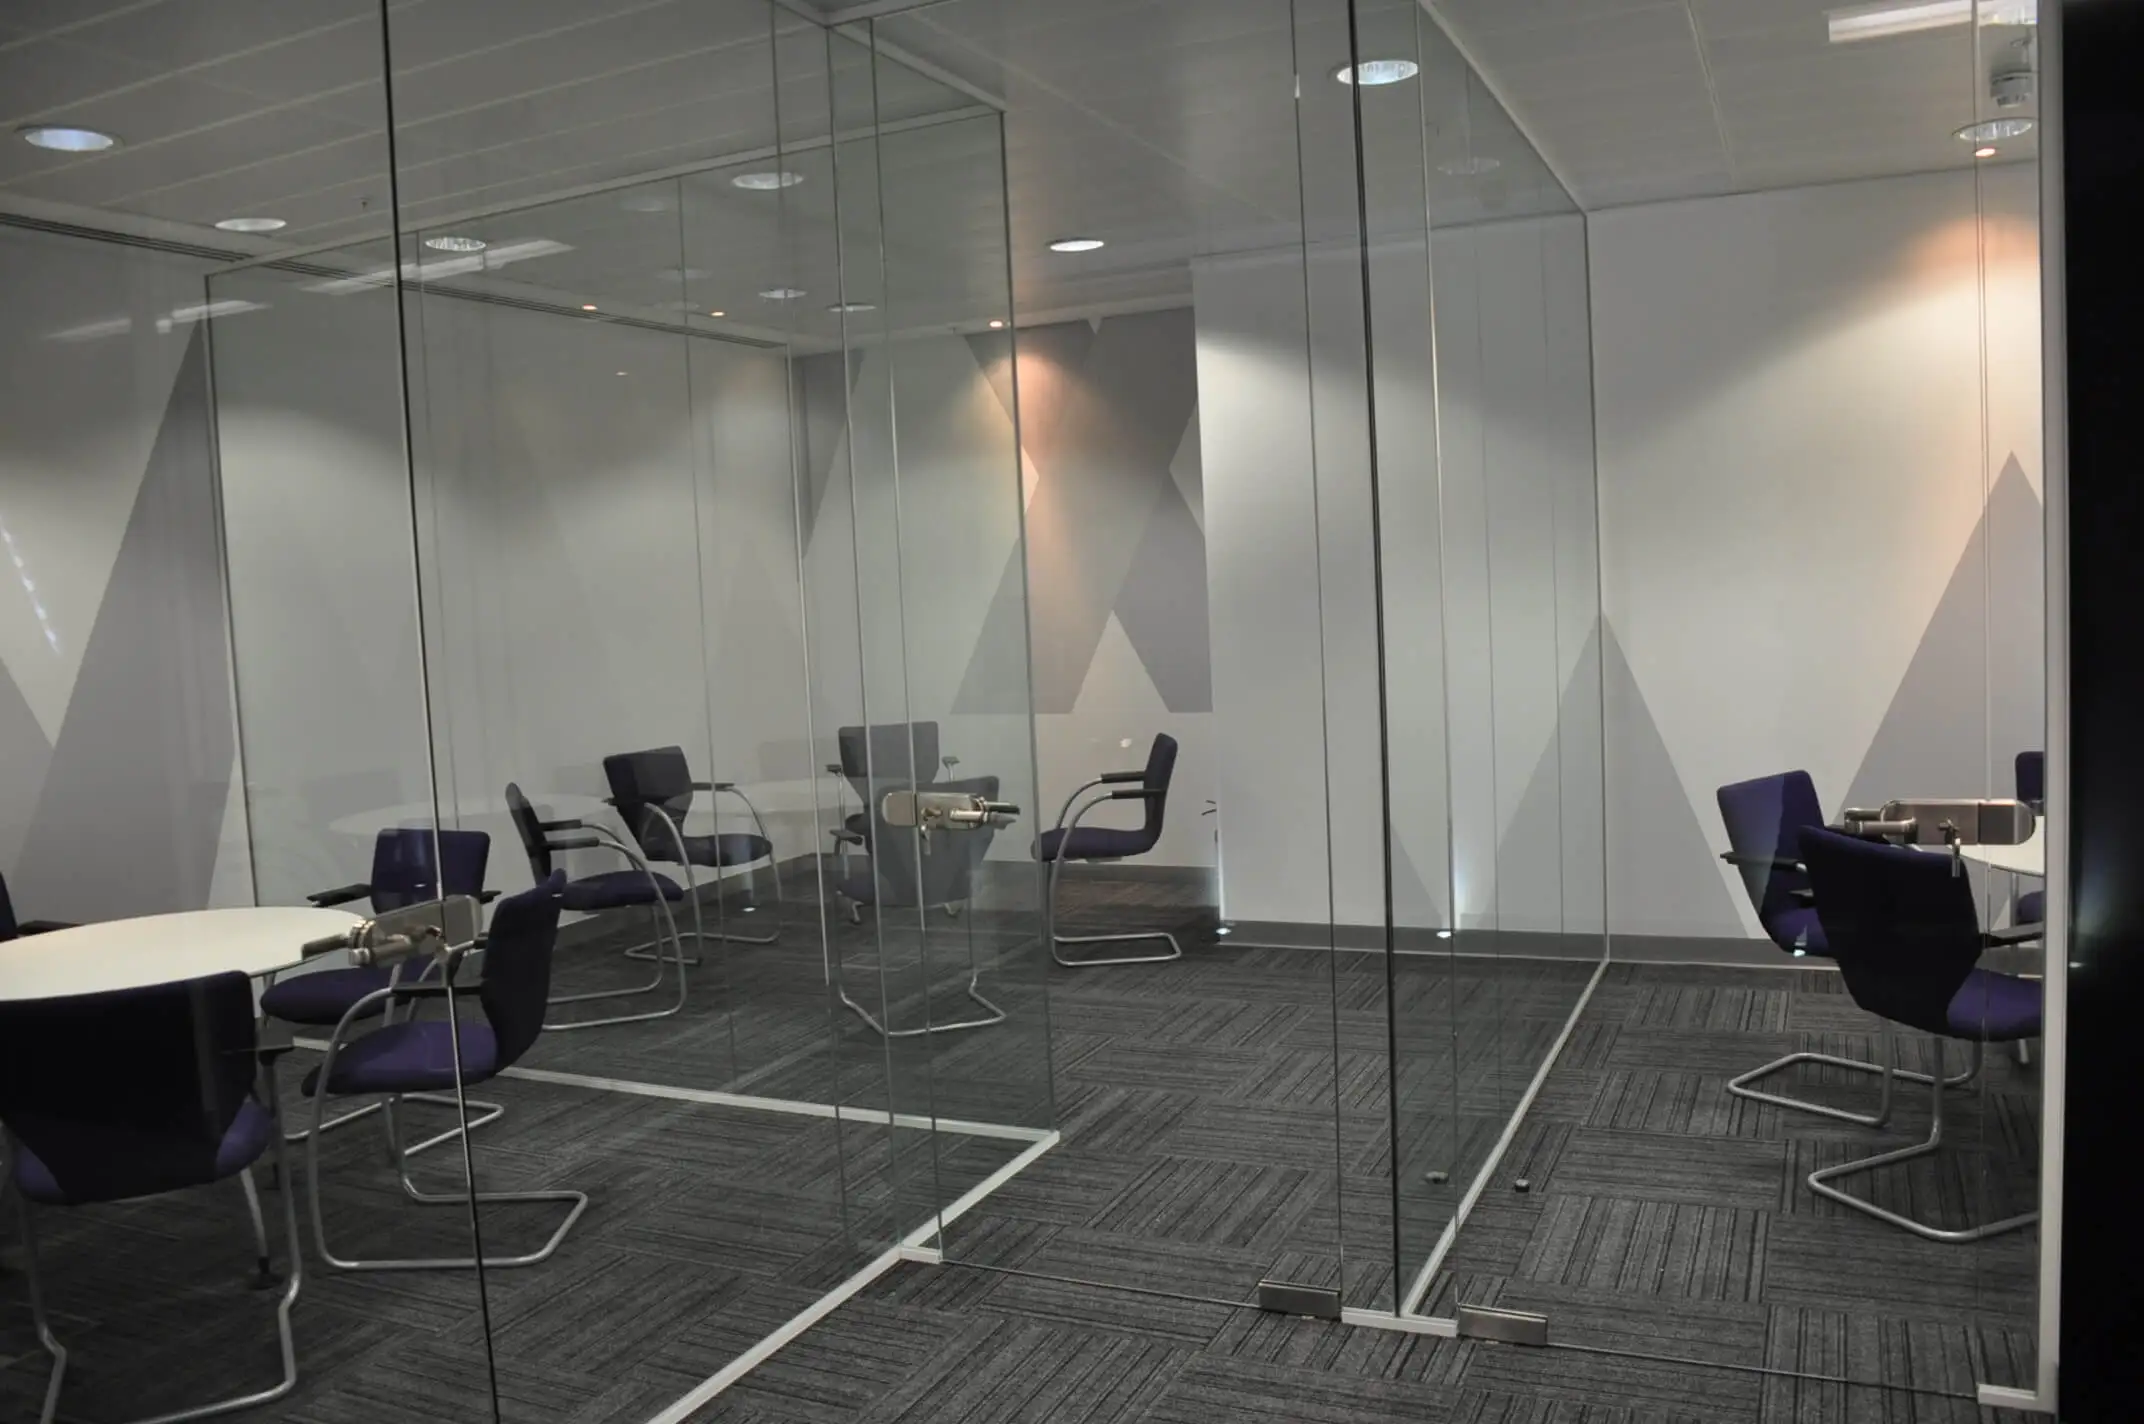 Small meeting space with glass partition